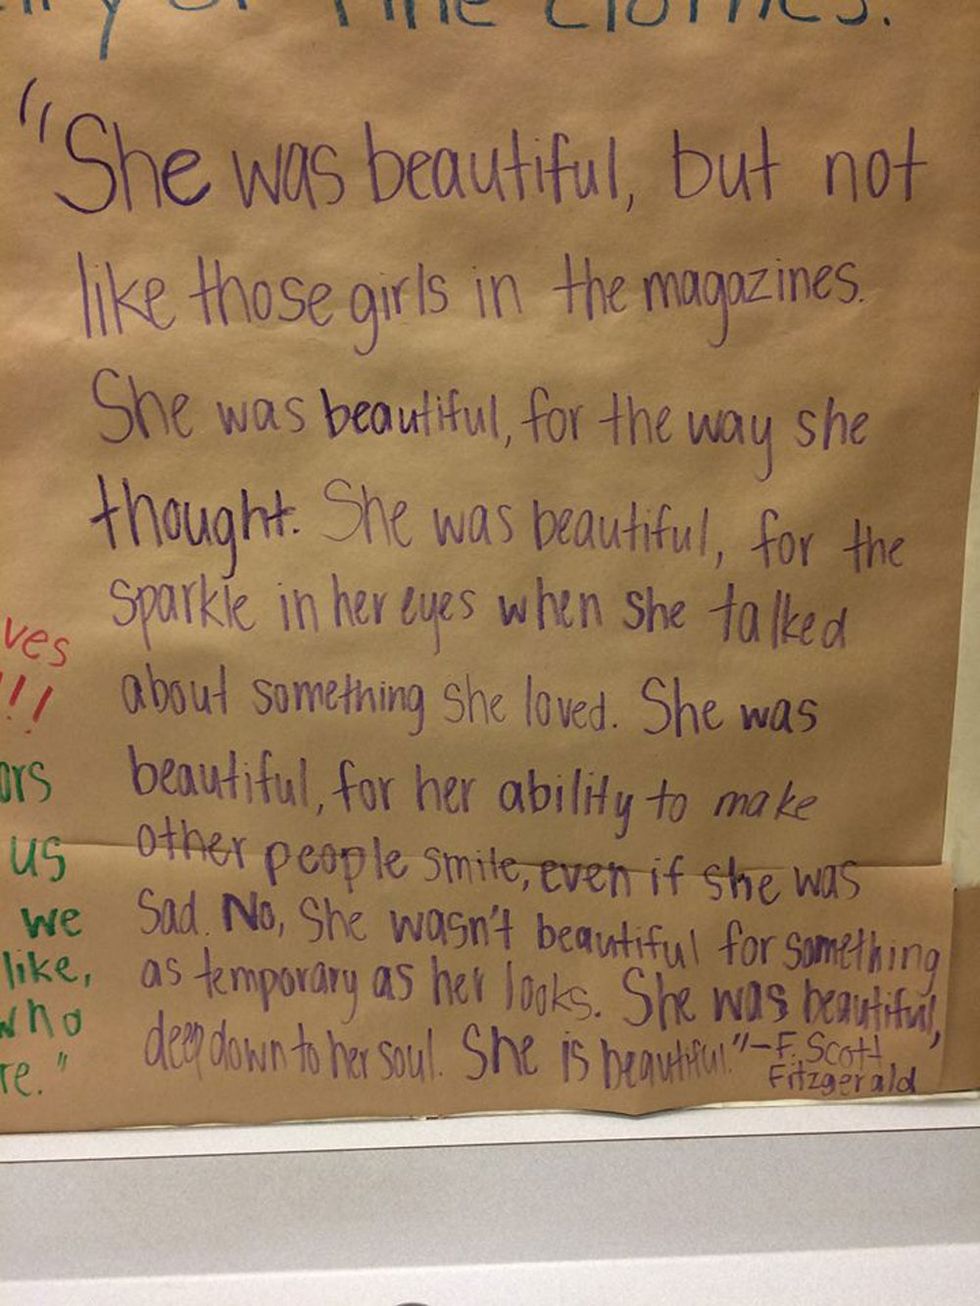 Students cover mirrors in their school with AMAZING quotes